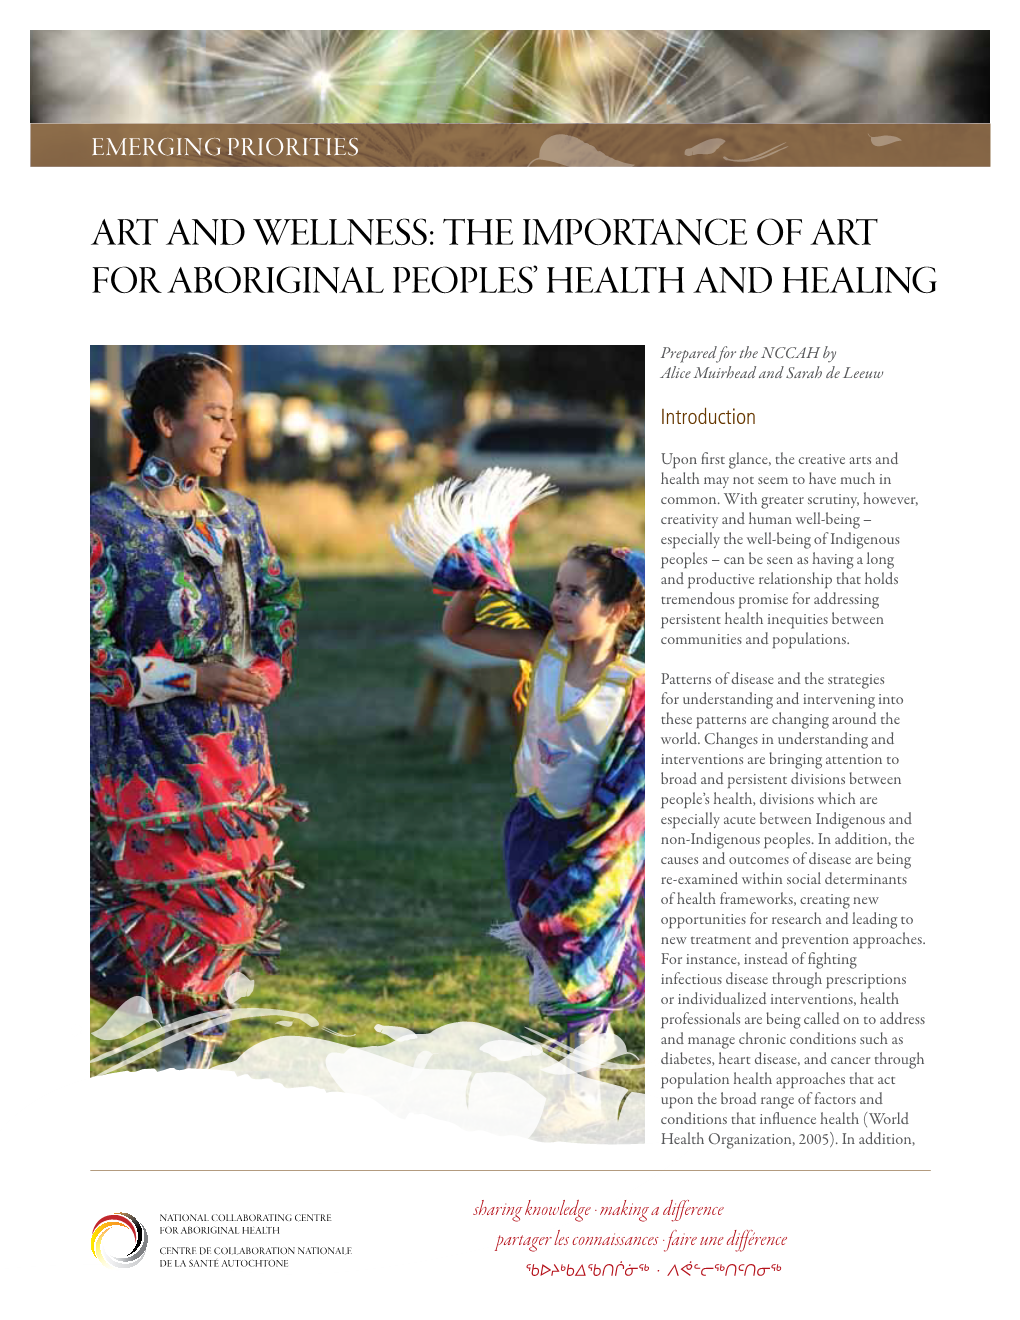 Art and Wellness: the Importance of Art for Aboriginal Peoples' Health and Healing